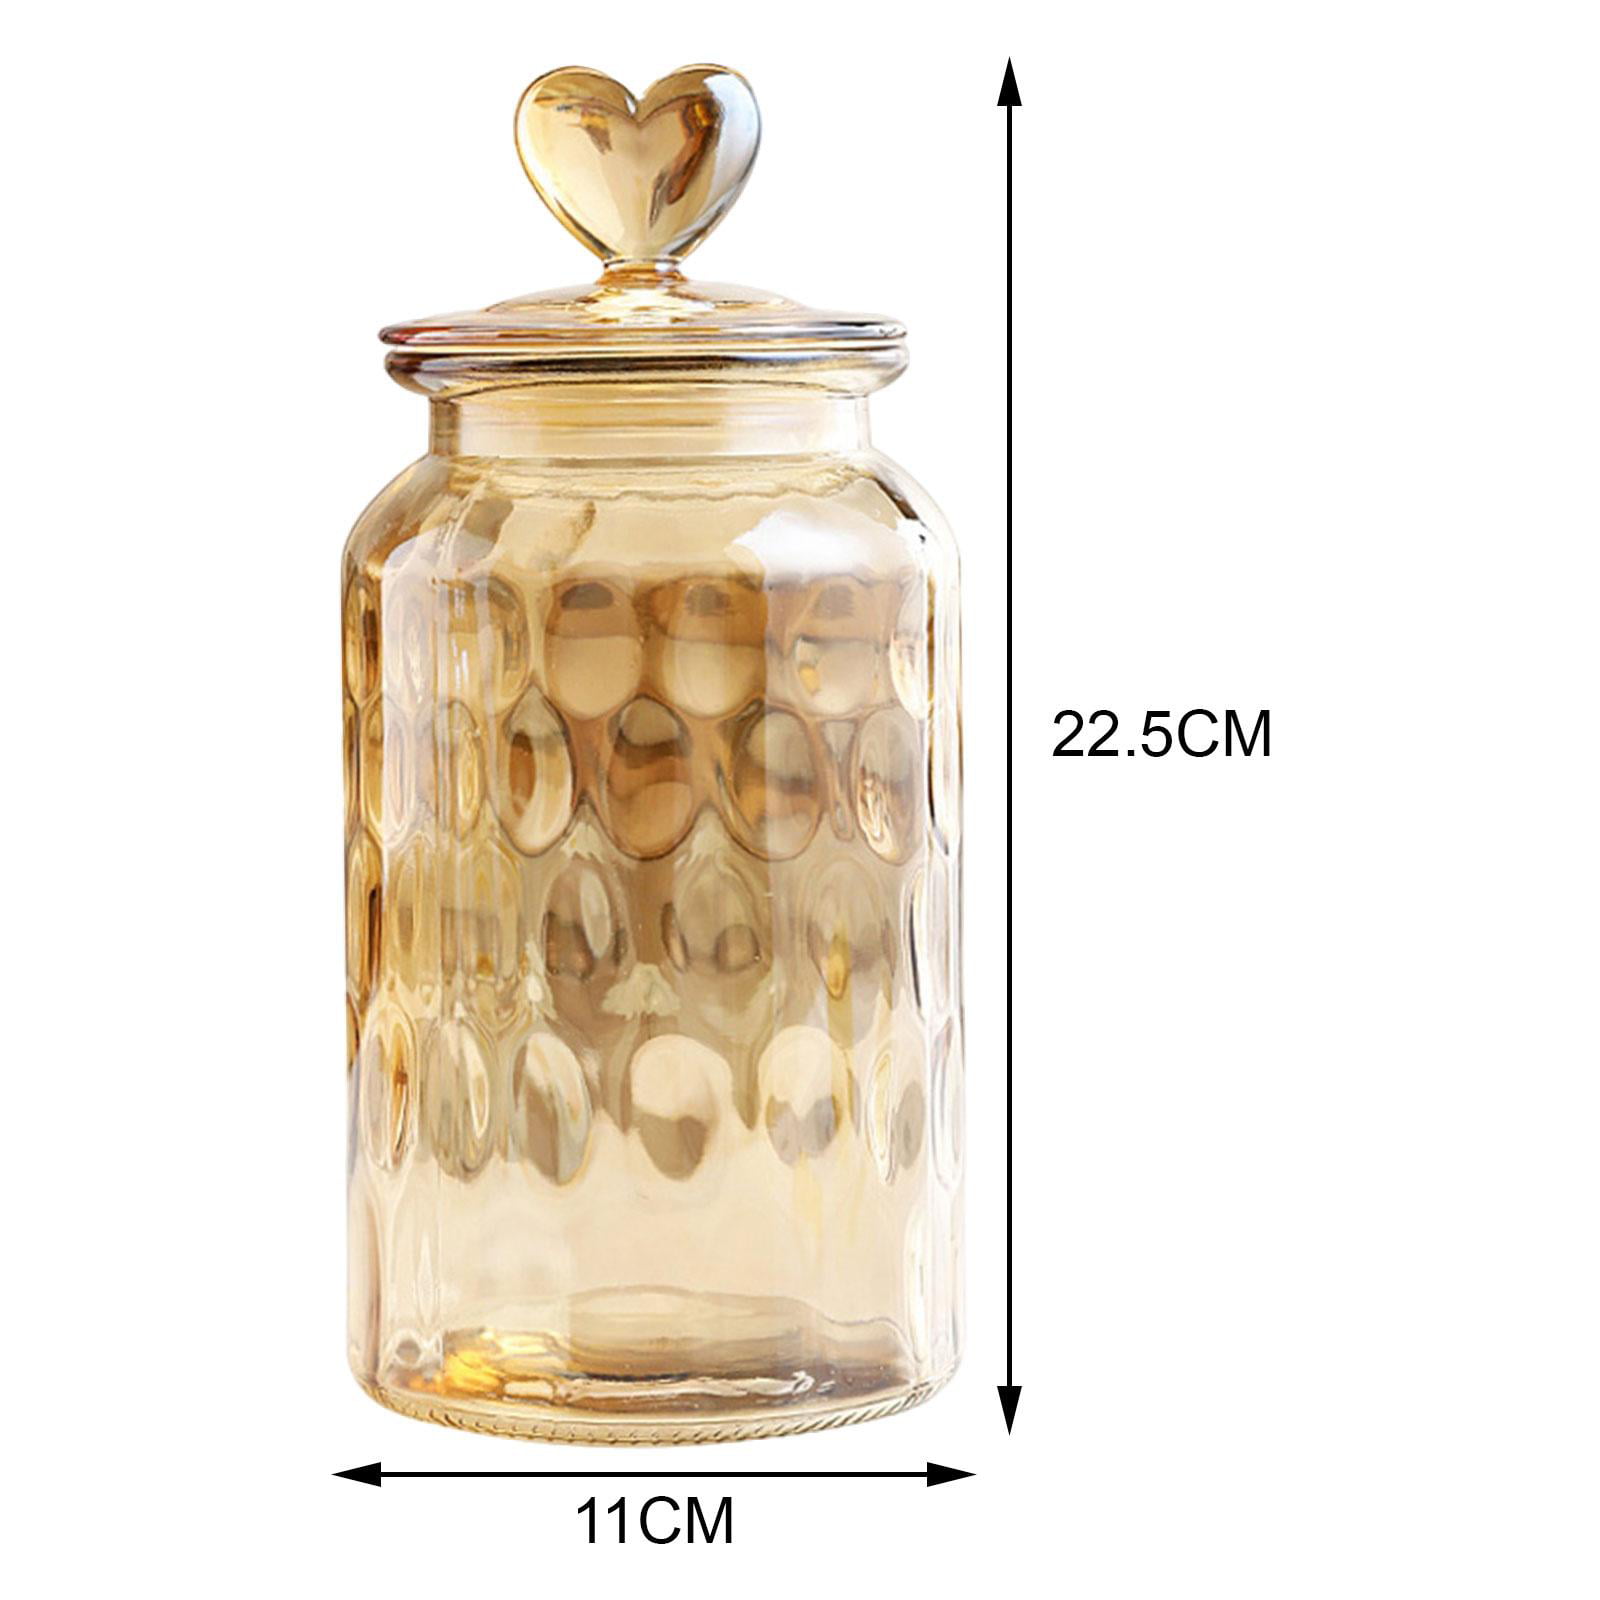  YUNCANG Glass Storage Jars [Set of 5],Clear Glass Food Storage  Containers with Airtight Bamboo Lid Stackable Kitchen Canisters for  Candy,Cookie,Rice,Sugar,Flour,Pasta,Nuts and Spice Jars(Square) : Home &  Kitchen